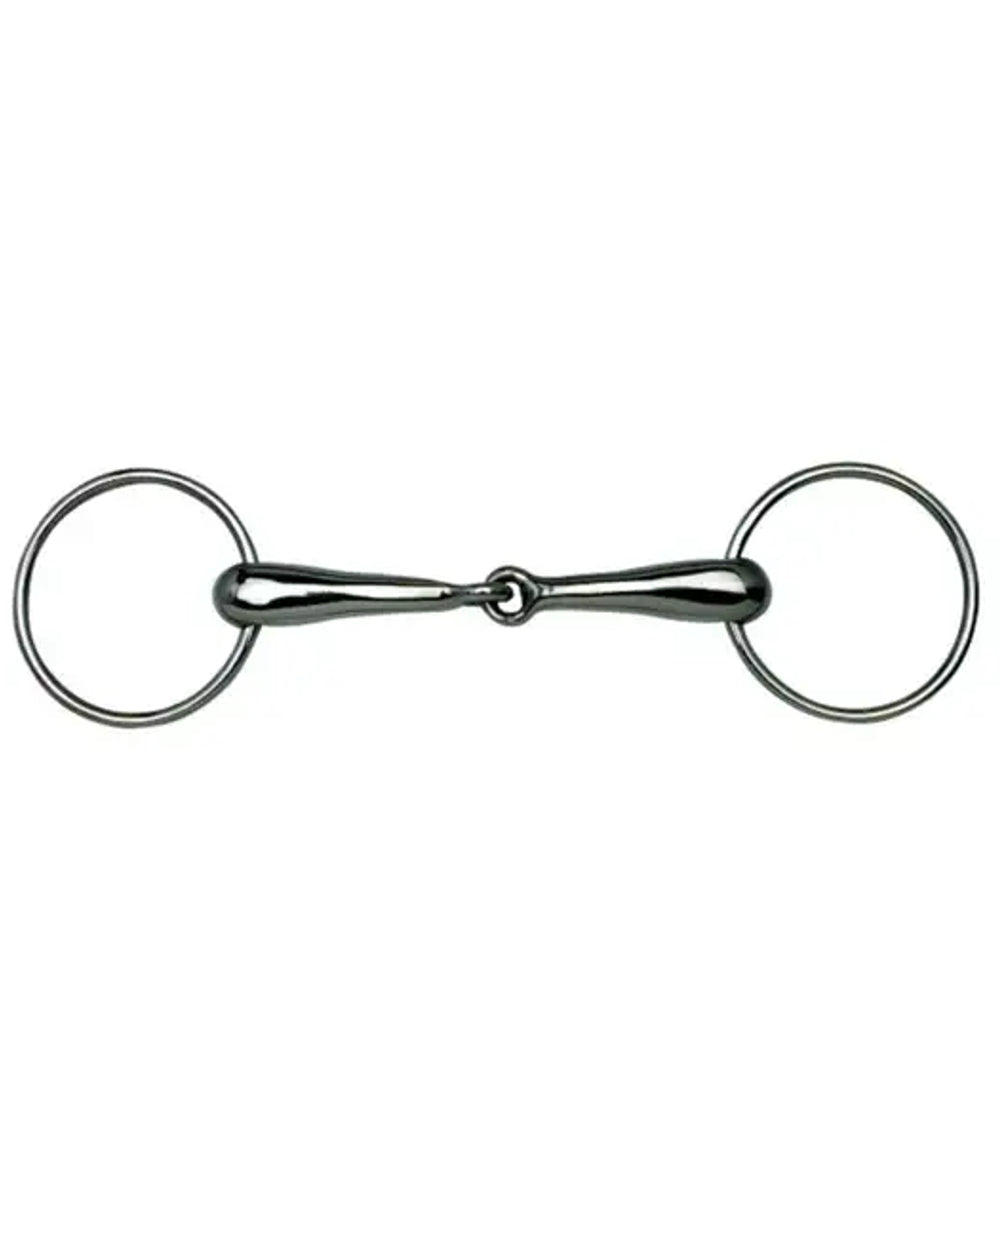 Korsteel Stainless Steel Hollow Mouth Jointed Loose Ring Snaffle Bit on white background 